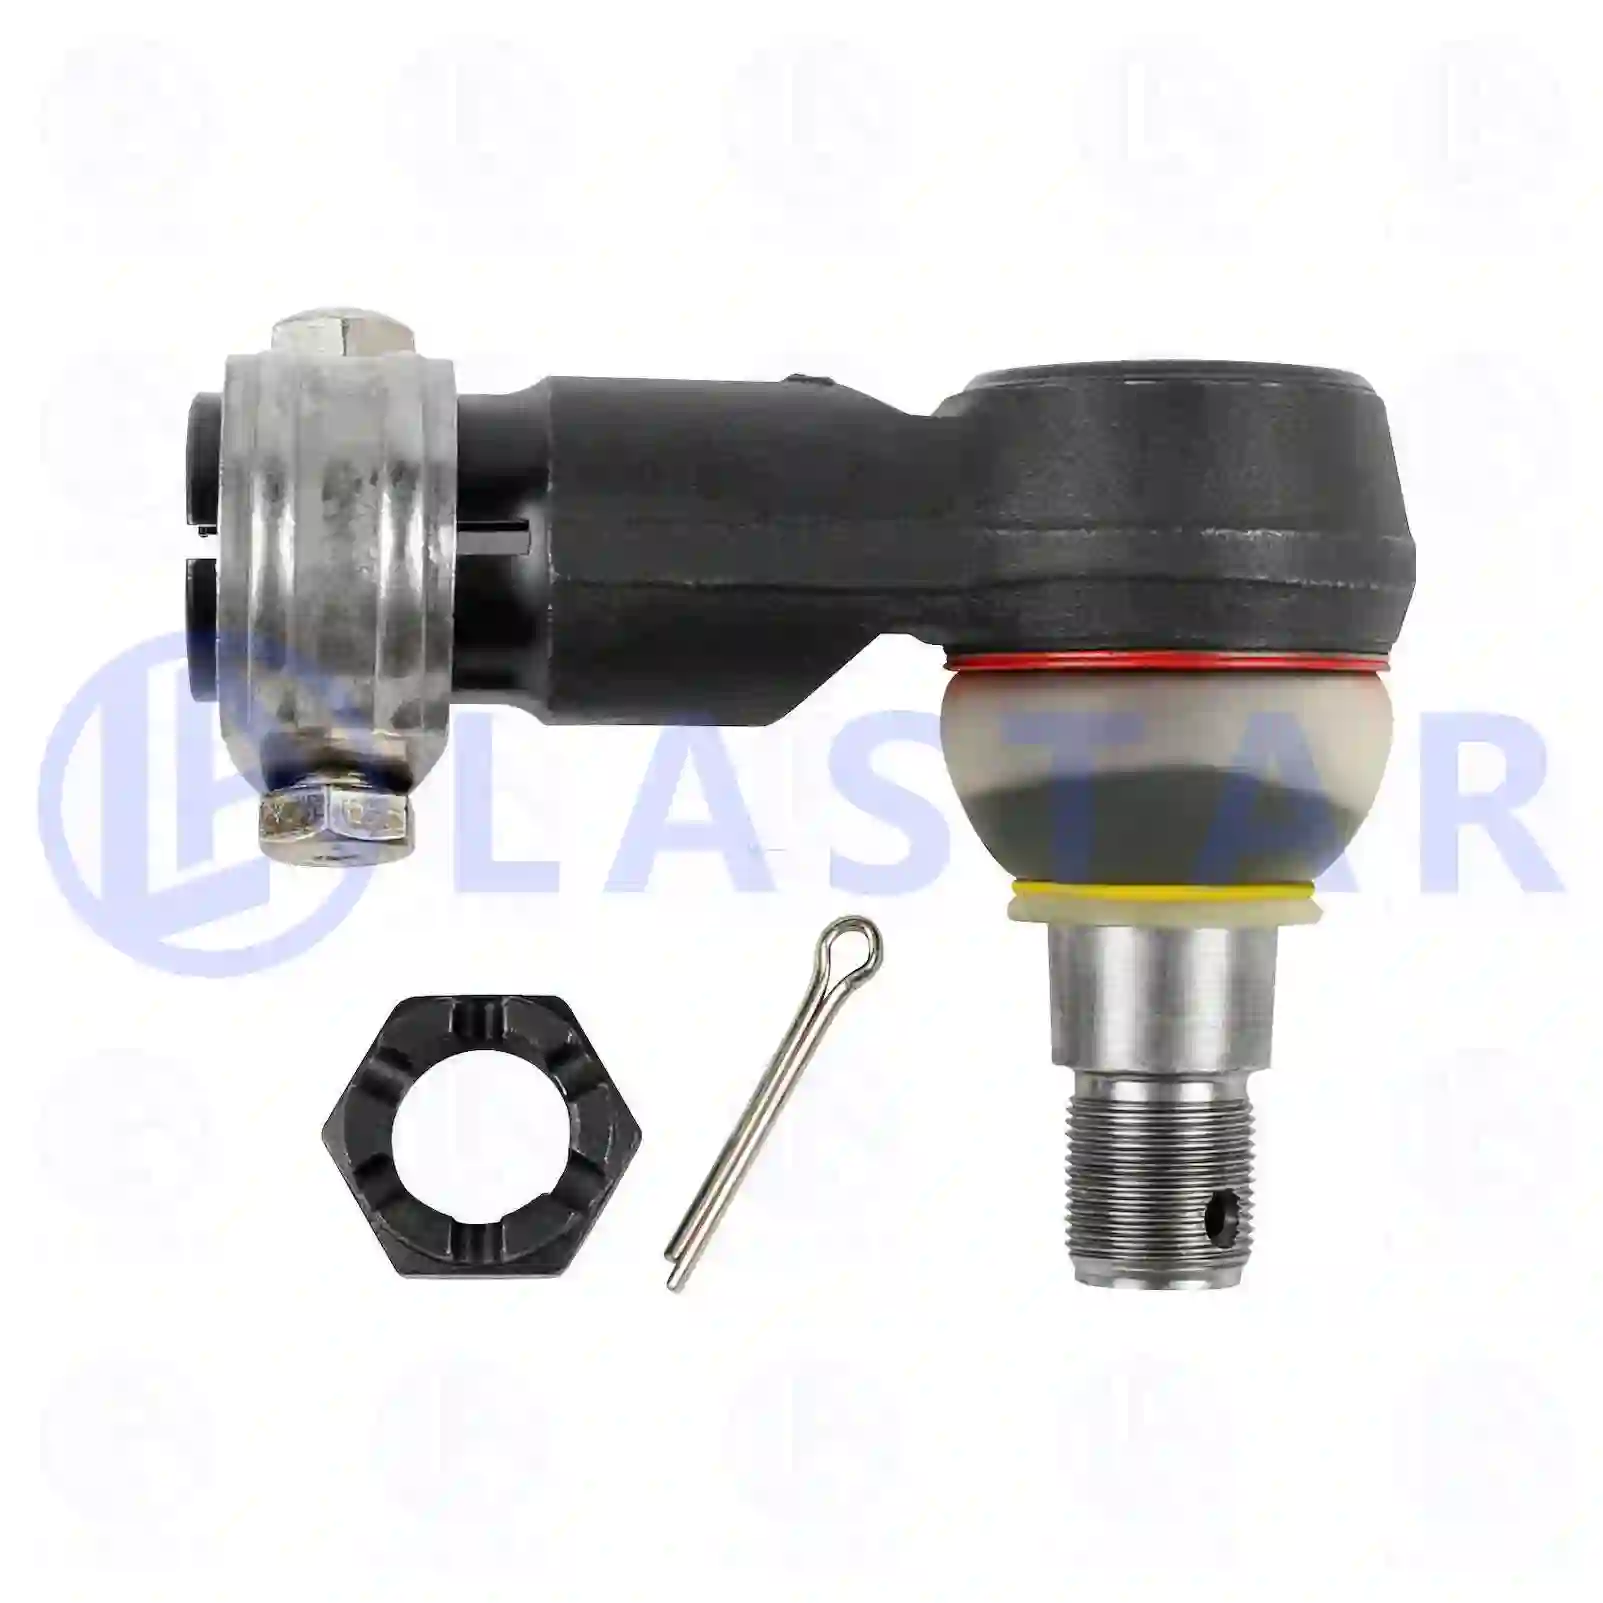 Drag Link Ball joint, right hand thread, la no: 77705669 ,  oem no:1603788, 1604105, ZG40402-0008 Lastar Spare Part | Truck Spare Parts, Auotomotive Spare Parts